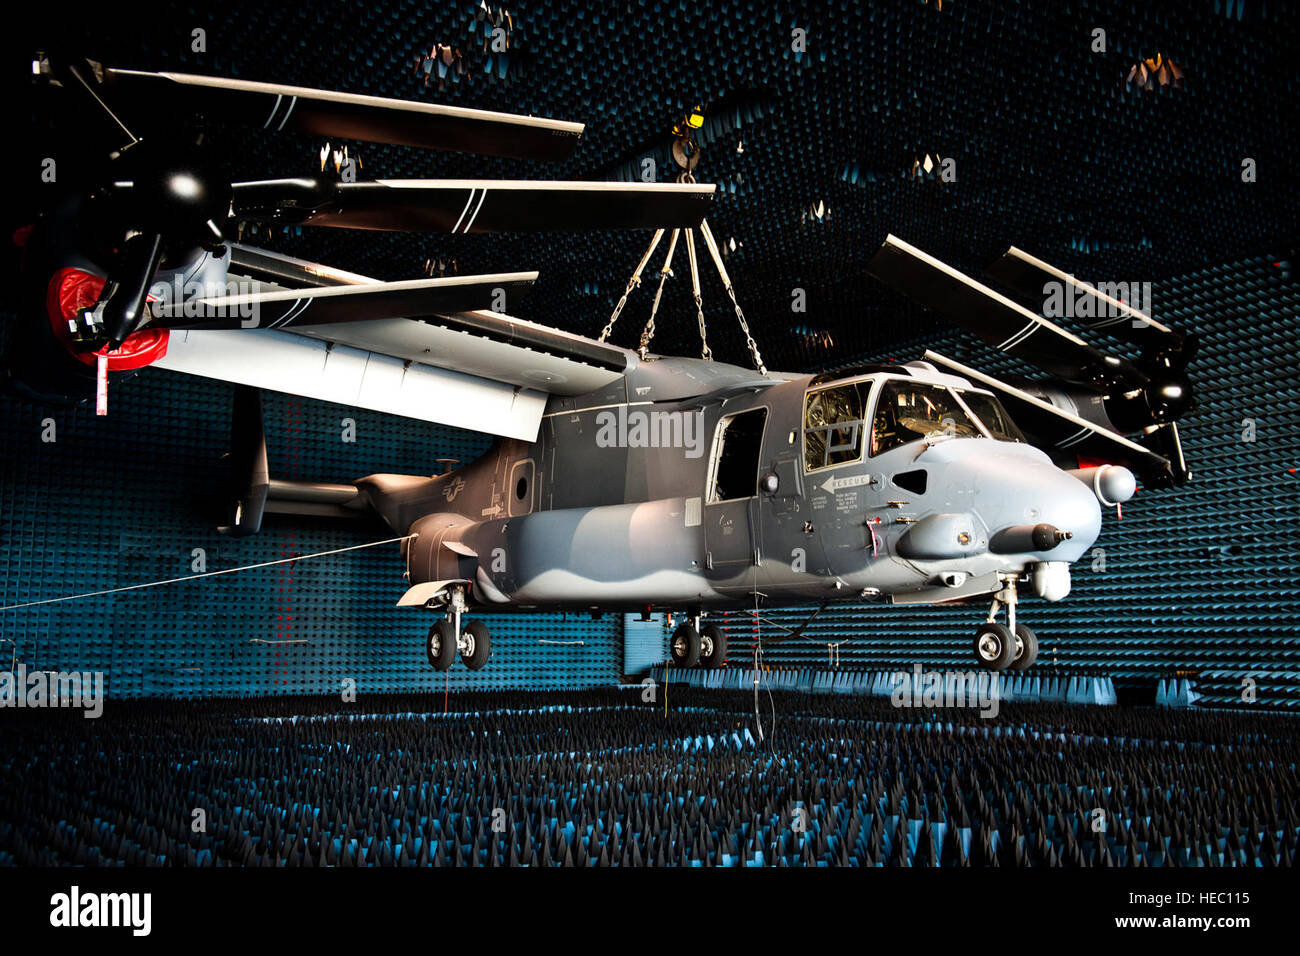 A CV-22 Osprey, belonging to the 8th Special Operations Squadron, hangs in the anechoic chamber at the joint preflight integration of munitions and electronic systems hangar at Eglin Air Force Base, Fla., March 6, 2012. The J-PRIMES anechoic chamber is a room designed to stop internal reflections of electromagnetic waves as well as insulate from exterior sources of electromagnetic noise.  J-PRIMES provides this environment to facilitate testing air-to-air and air-to-surface munitions and electronics systems on full-scale aircraft and land vehicles prior to open air testing. (U.S. Air Force pho Stock Photo